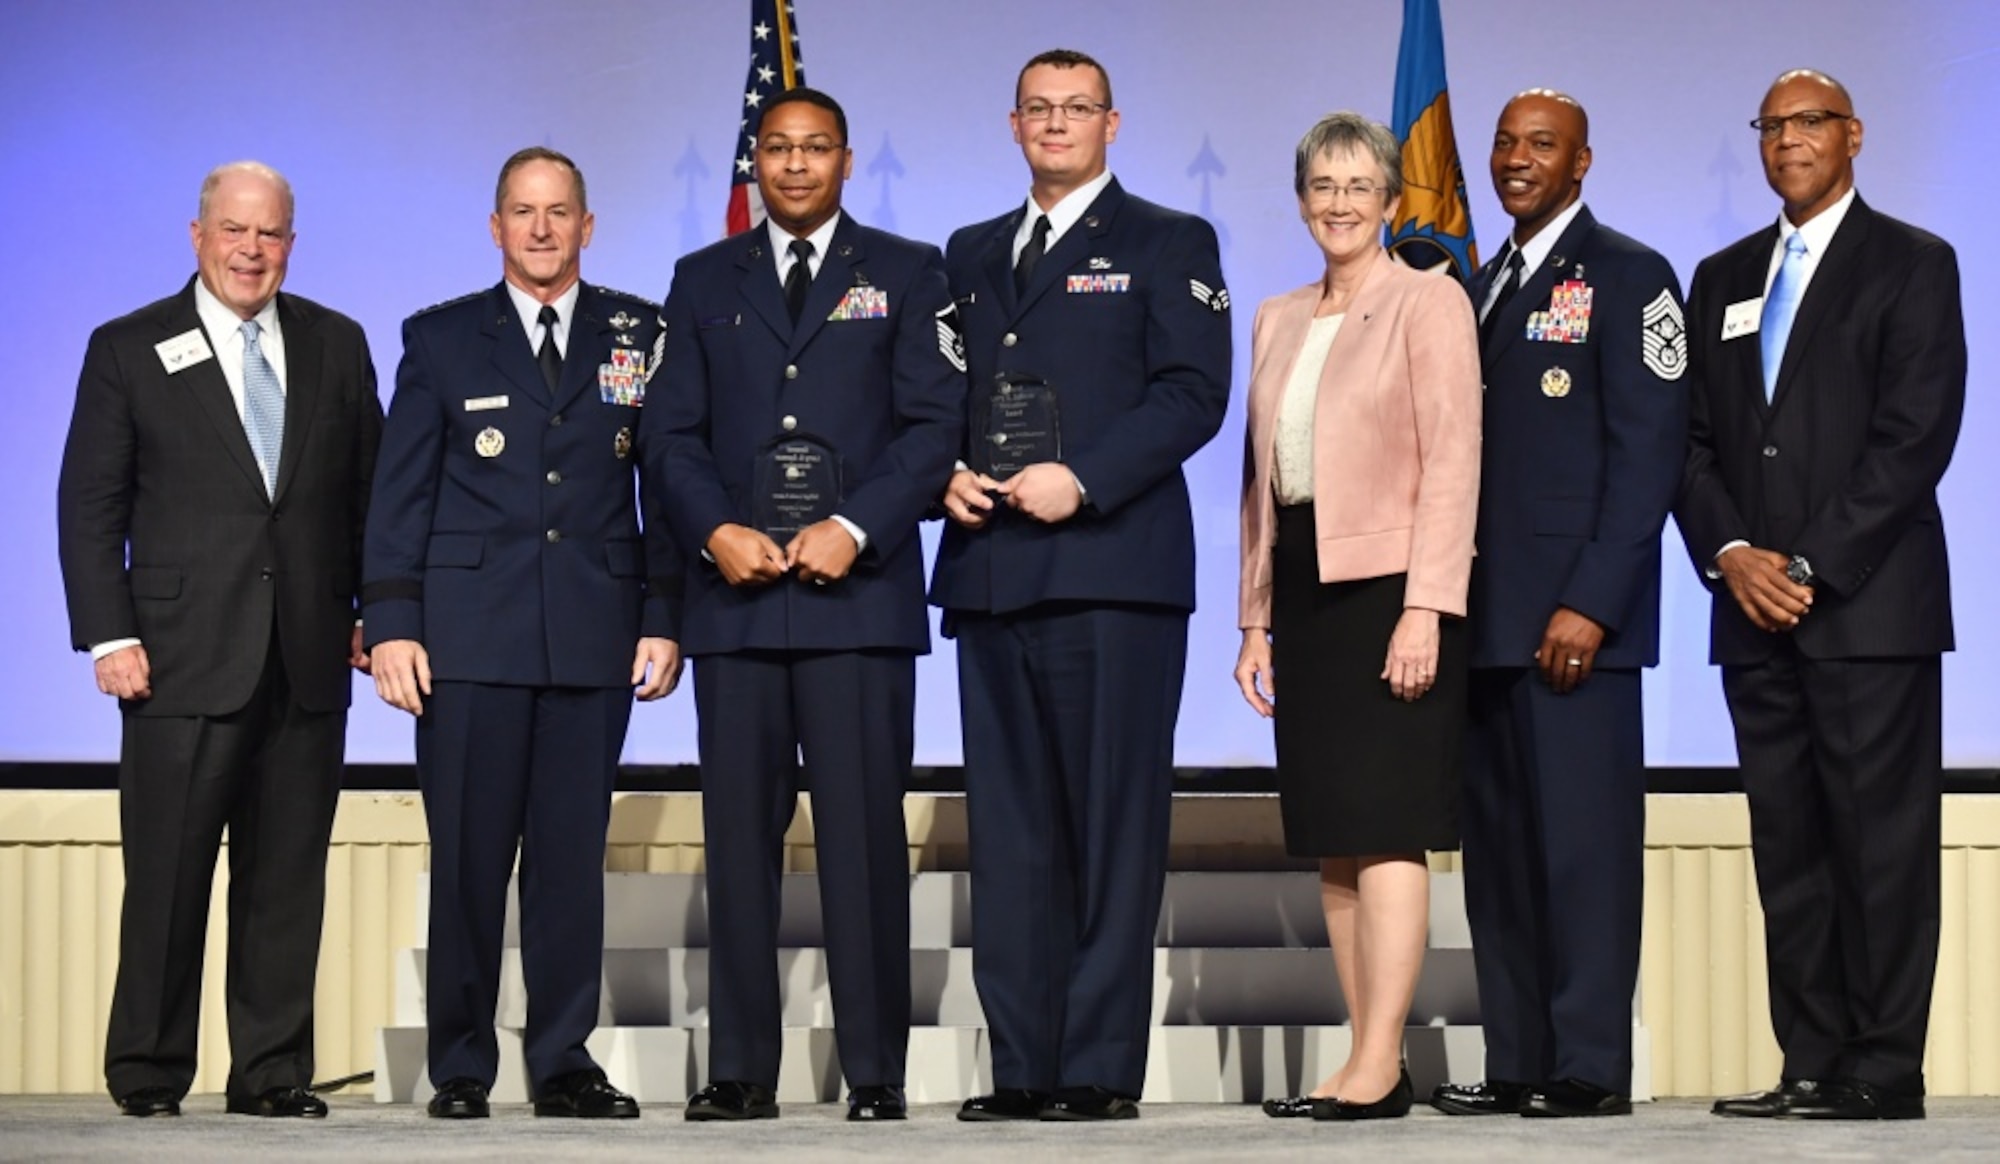 Master Sgt. Louis Lusco, third from left, and Senior Airman Dakota Williamson received the Gen. Spencer Innovation Award - Team from Chief of Staff of the Air Force Gen. David L. Goldfein, second from left, Secretary of the Air Force Heather Wilson, third from right, Chief Master Sgt. of the Air Force Kaleth Wright, second from right, Gen. (ret.) Larry Spencer, far right, and Whit Peters, Chairman of the Air Force Association Board, far left, during the AFA Air, Space and Cyber Conference in National Harbor, Md., Sept. 17, 2018. Lusco and Williamson are part of the maintenance Top Coat Team at MacDill Air Force Base, Fla. (U.S. Air Force photo by Staff Sgt. Rusty Frank)